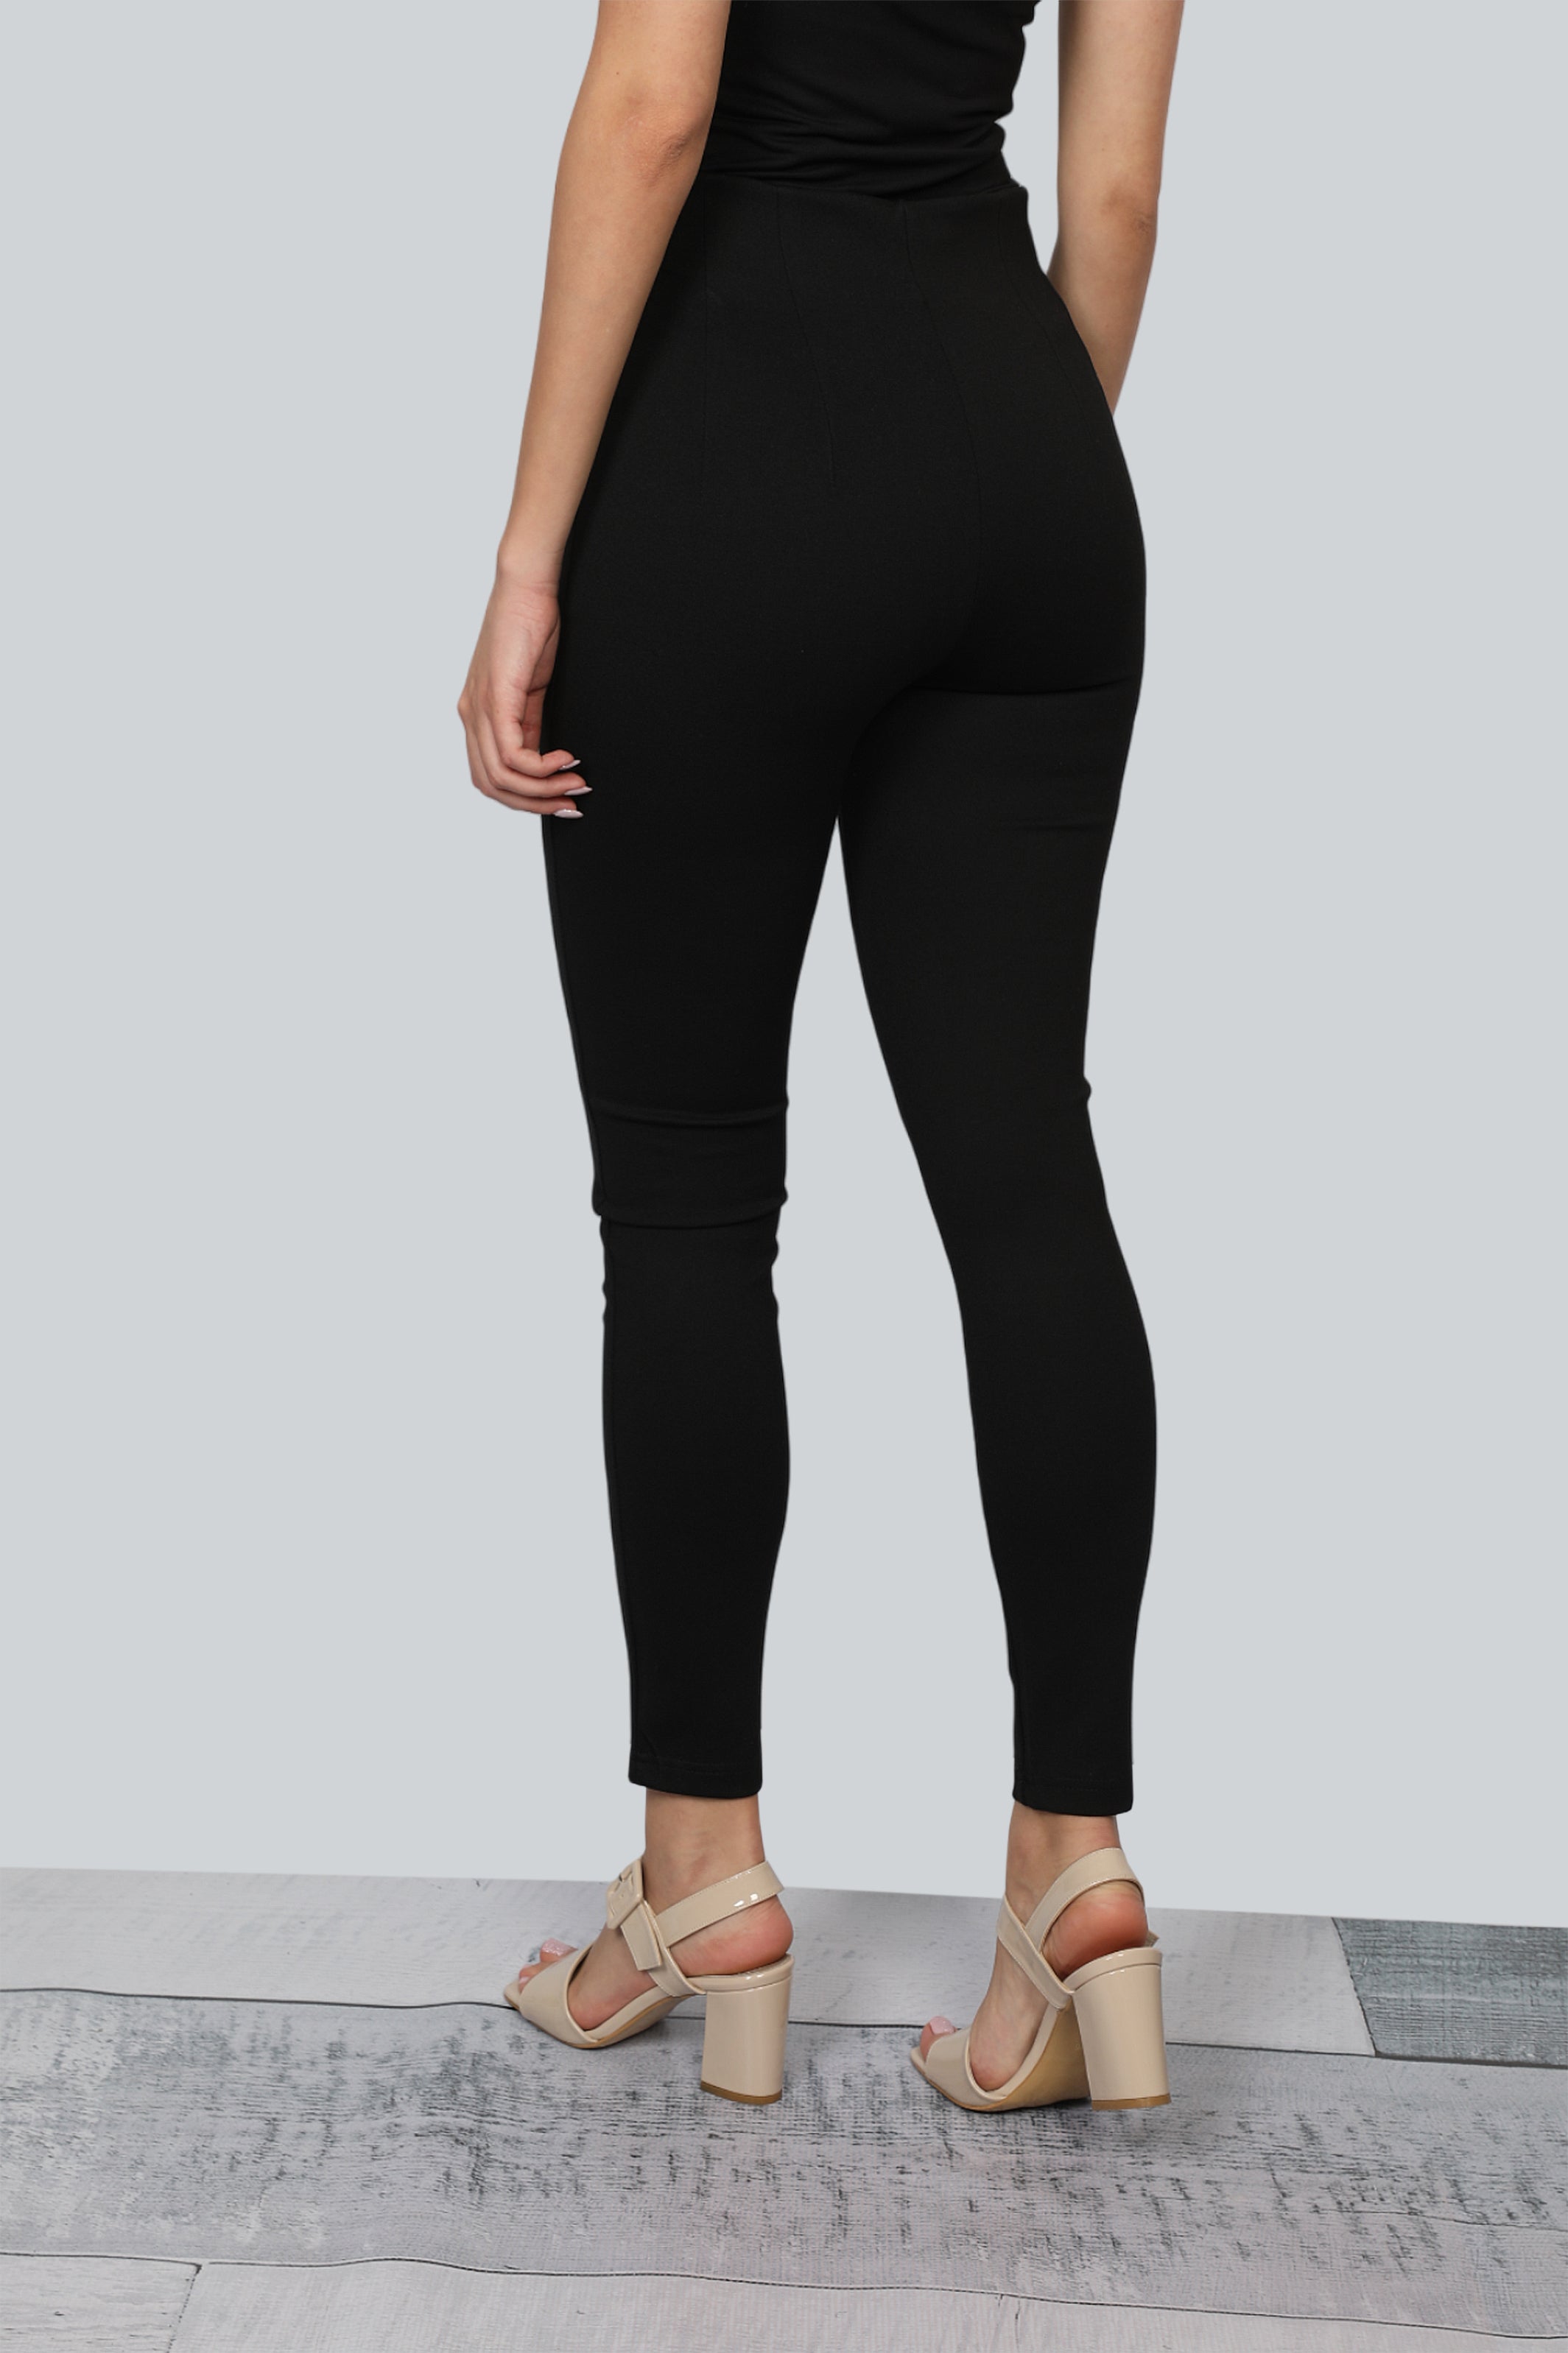 High Waisted Black Pants With Side Zipper